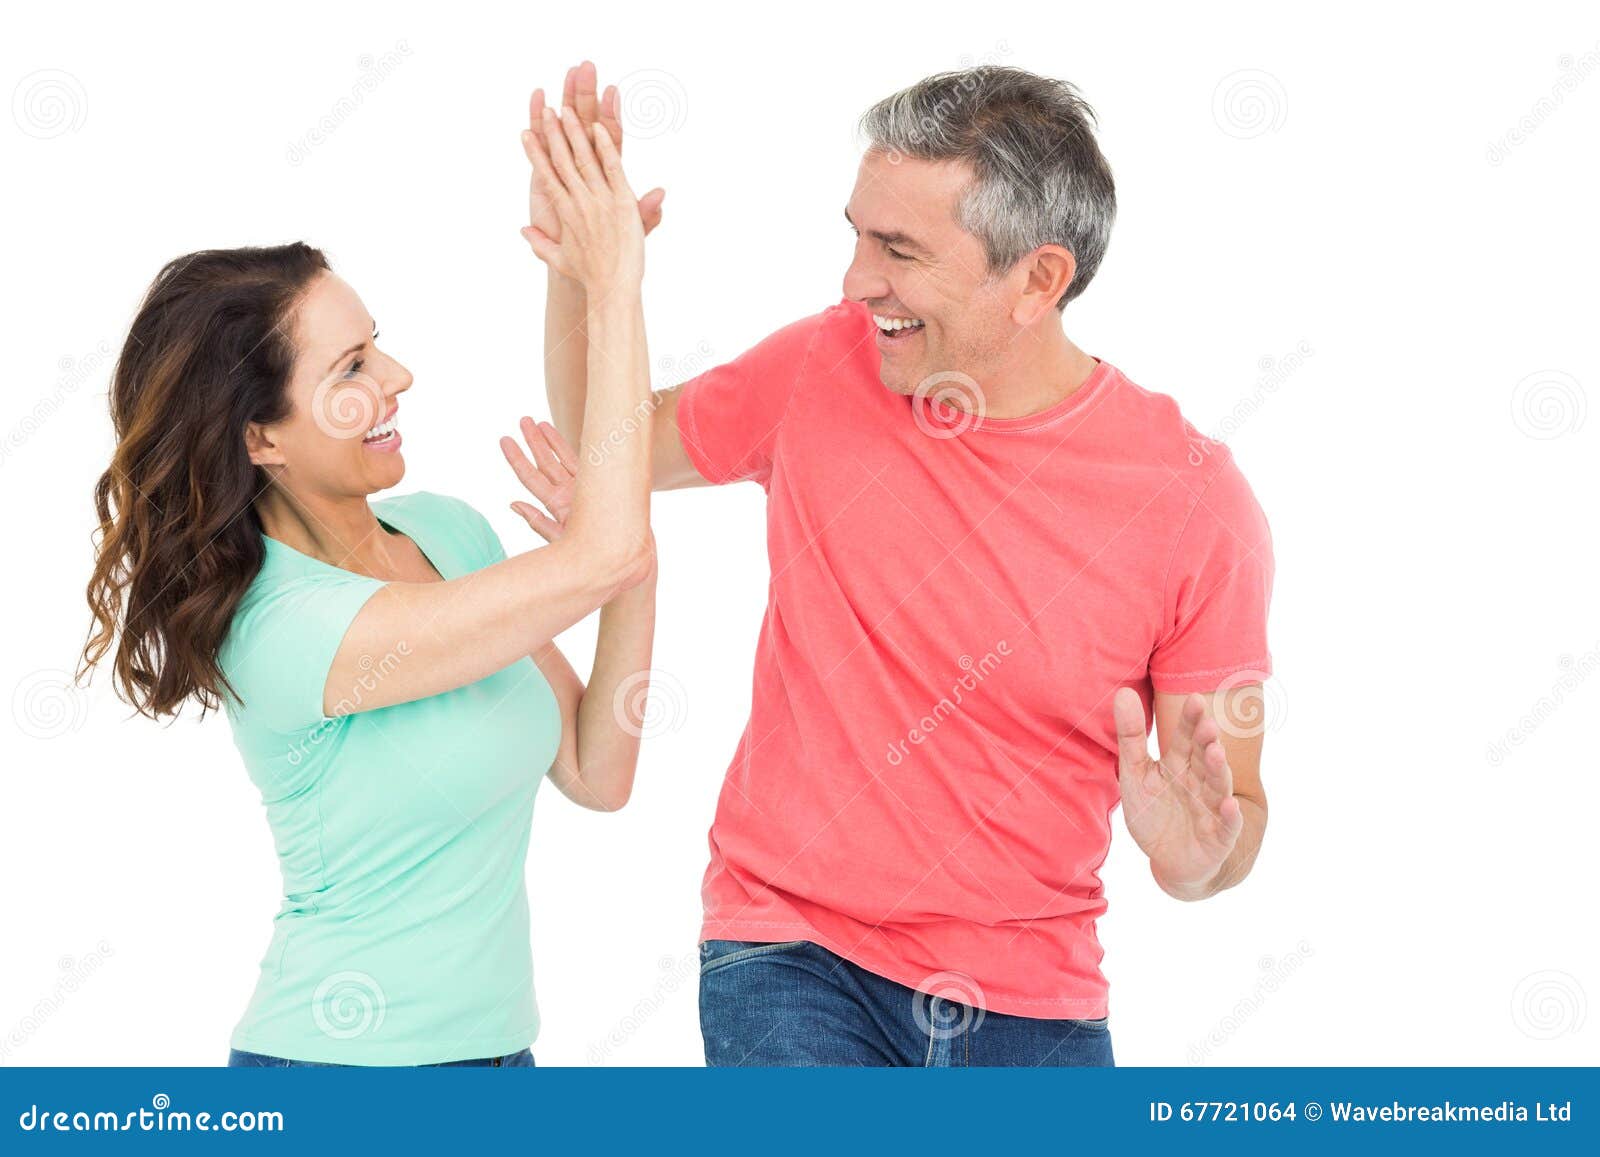 excited couple giving a high-five